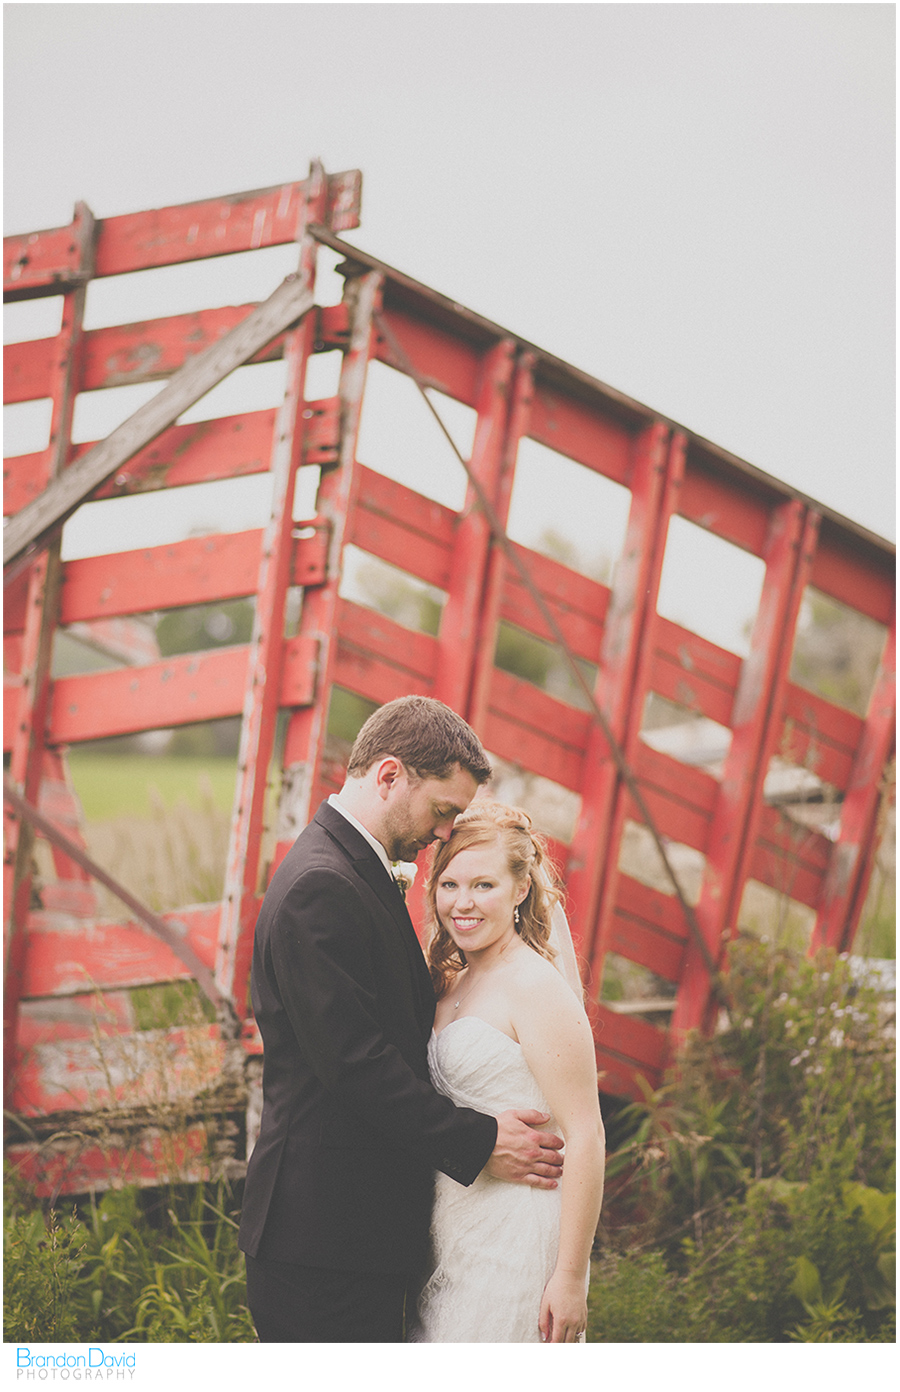 ographer - the Bride and Groom - Purple Hill Farms - Broken Down Wagon